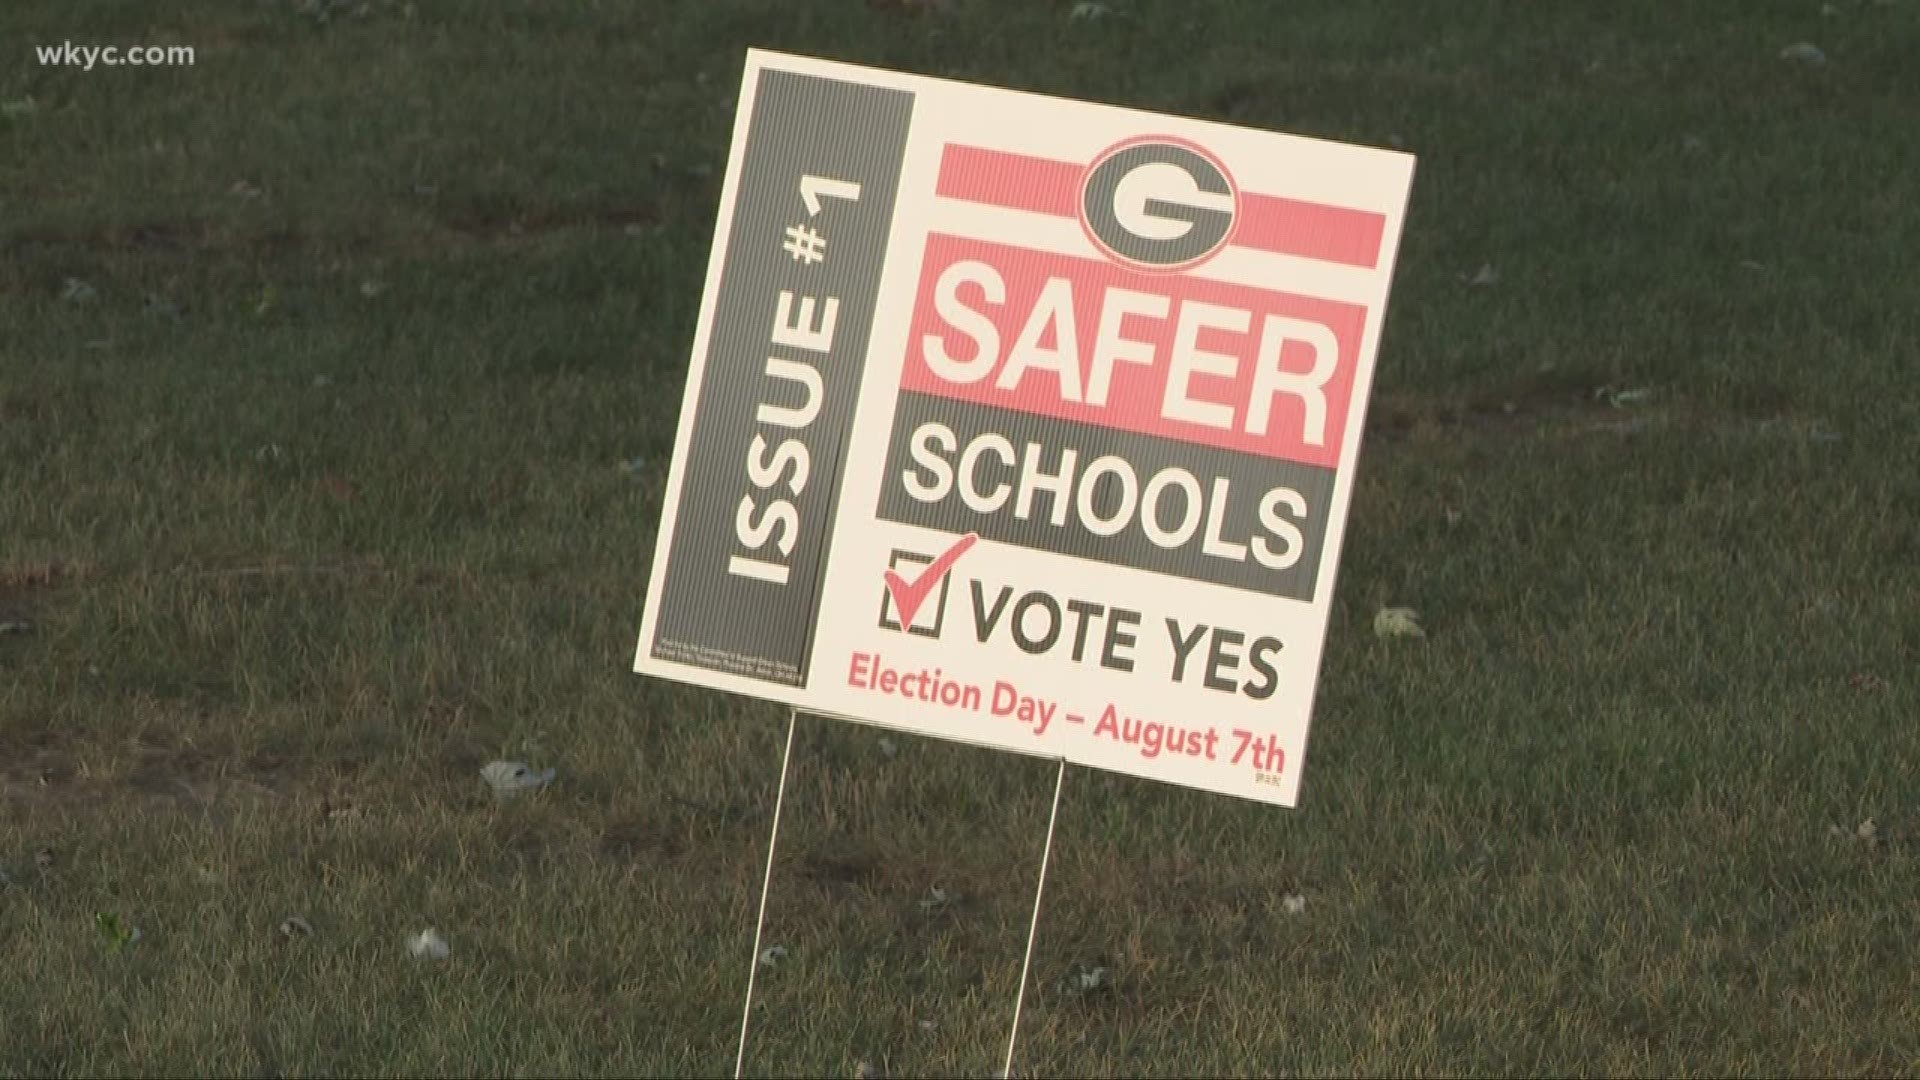 Green Local Schools ask voters to focus on safety